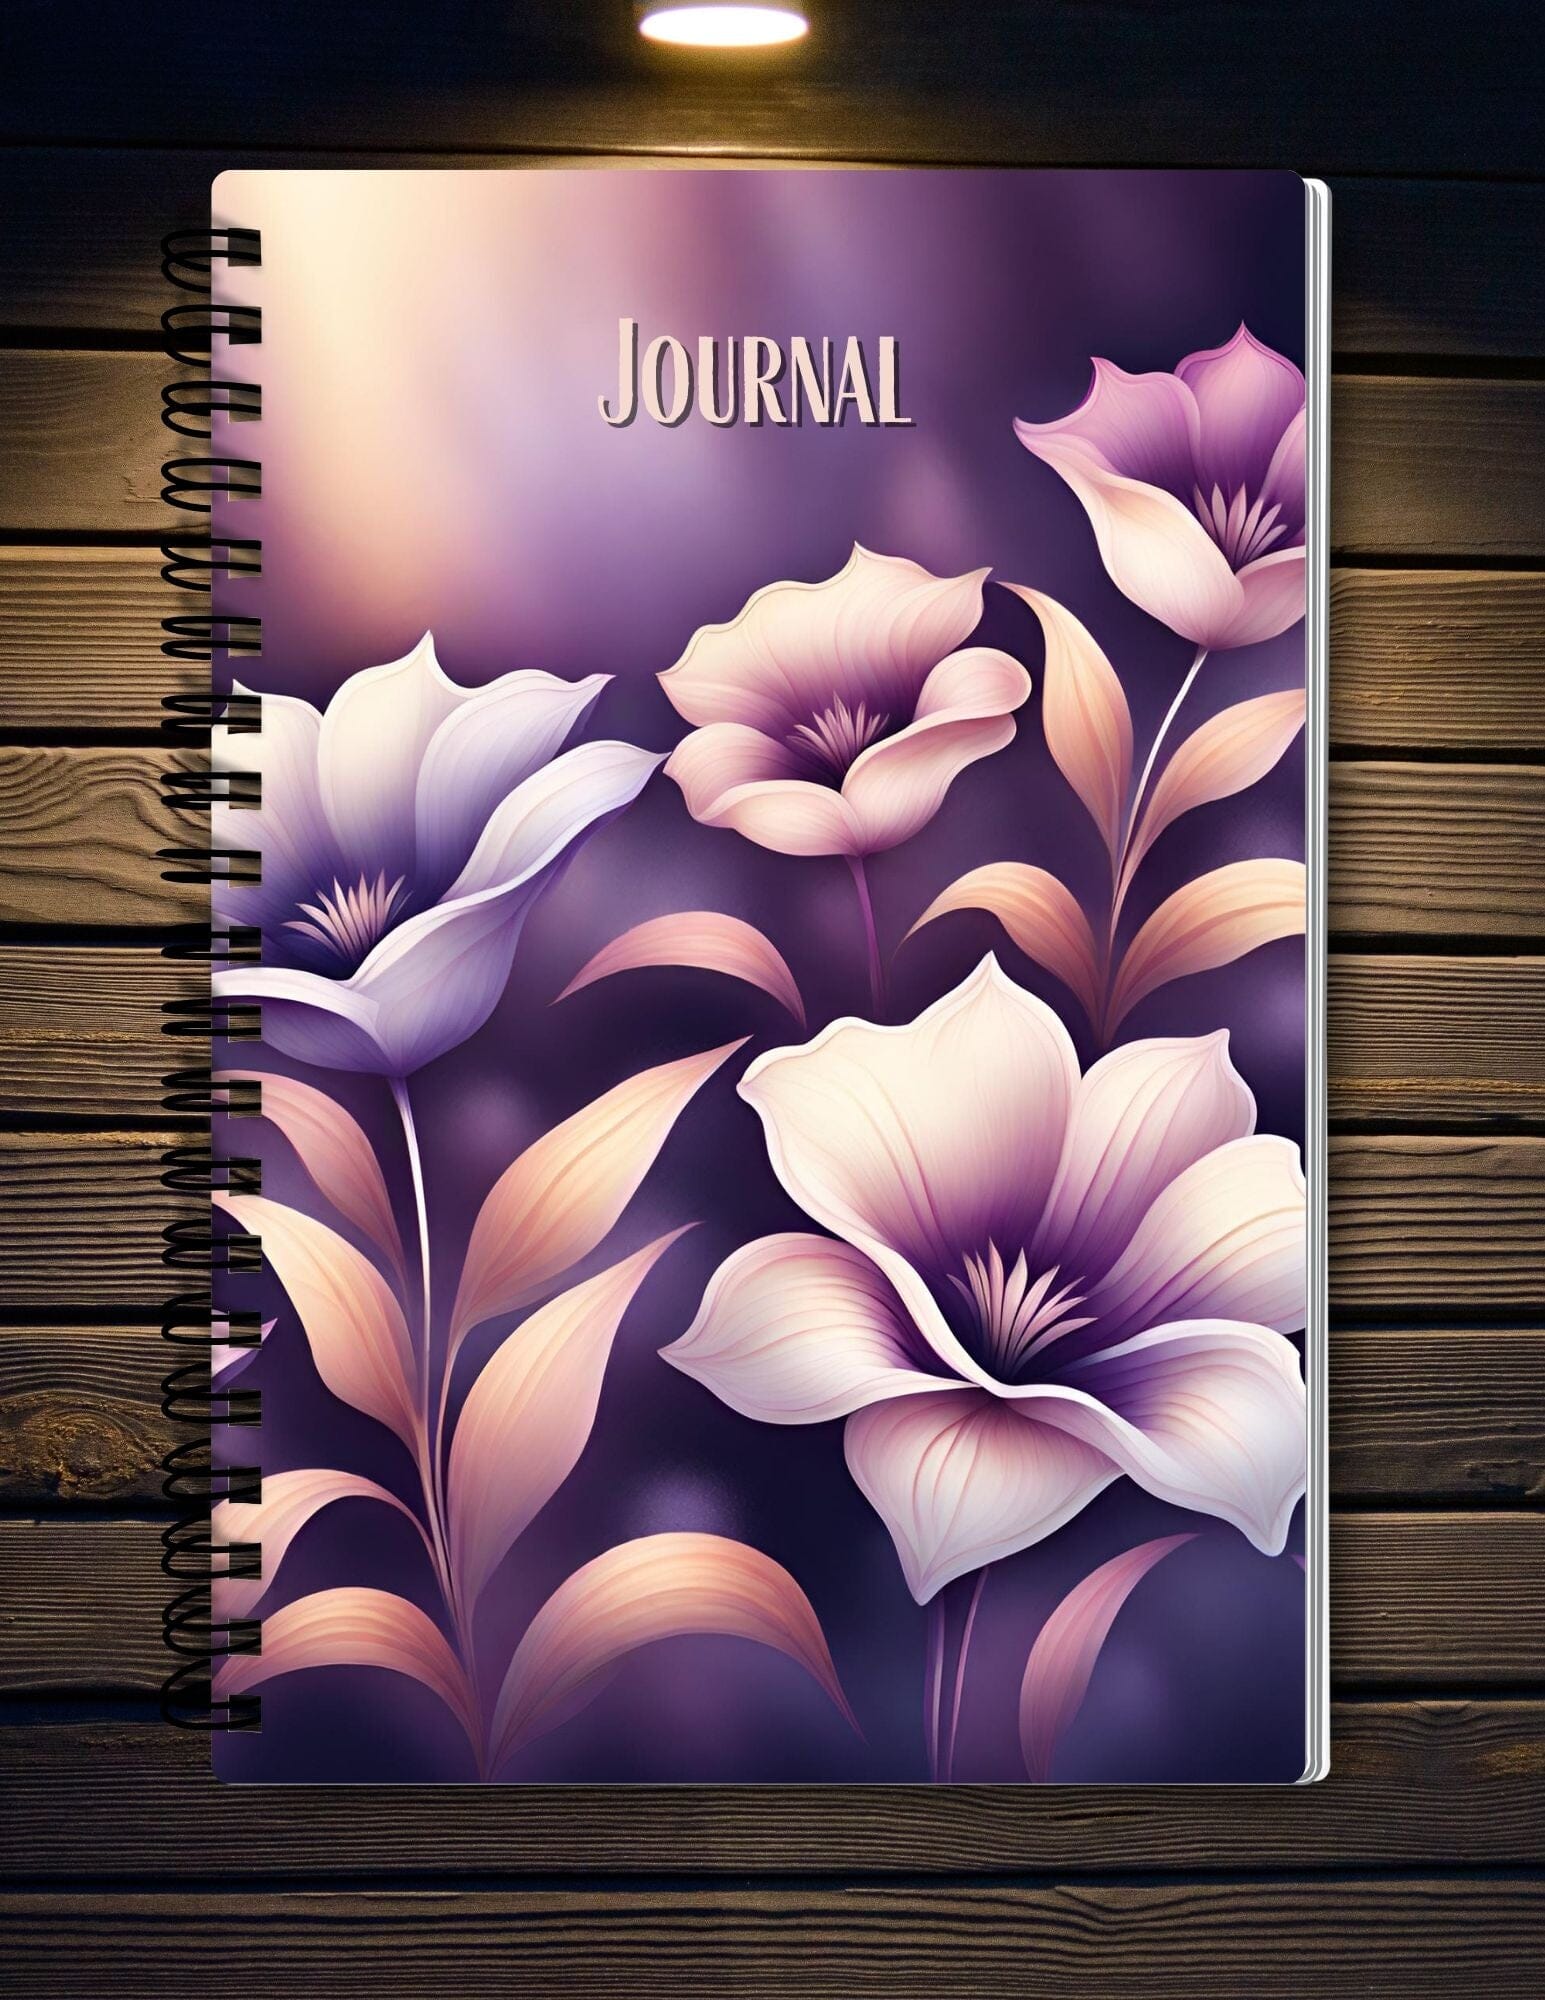 Blossom & Thrive Sistah Journal Whispers of Tranquility 